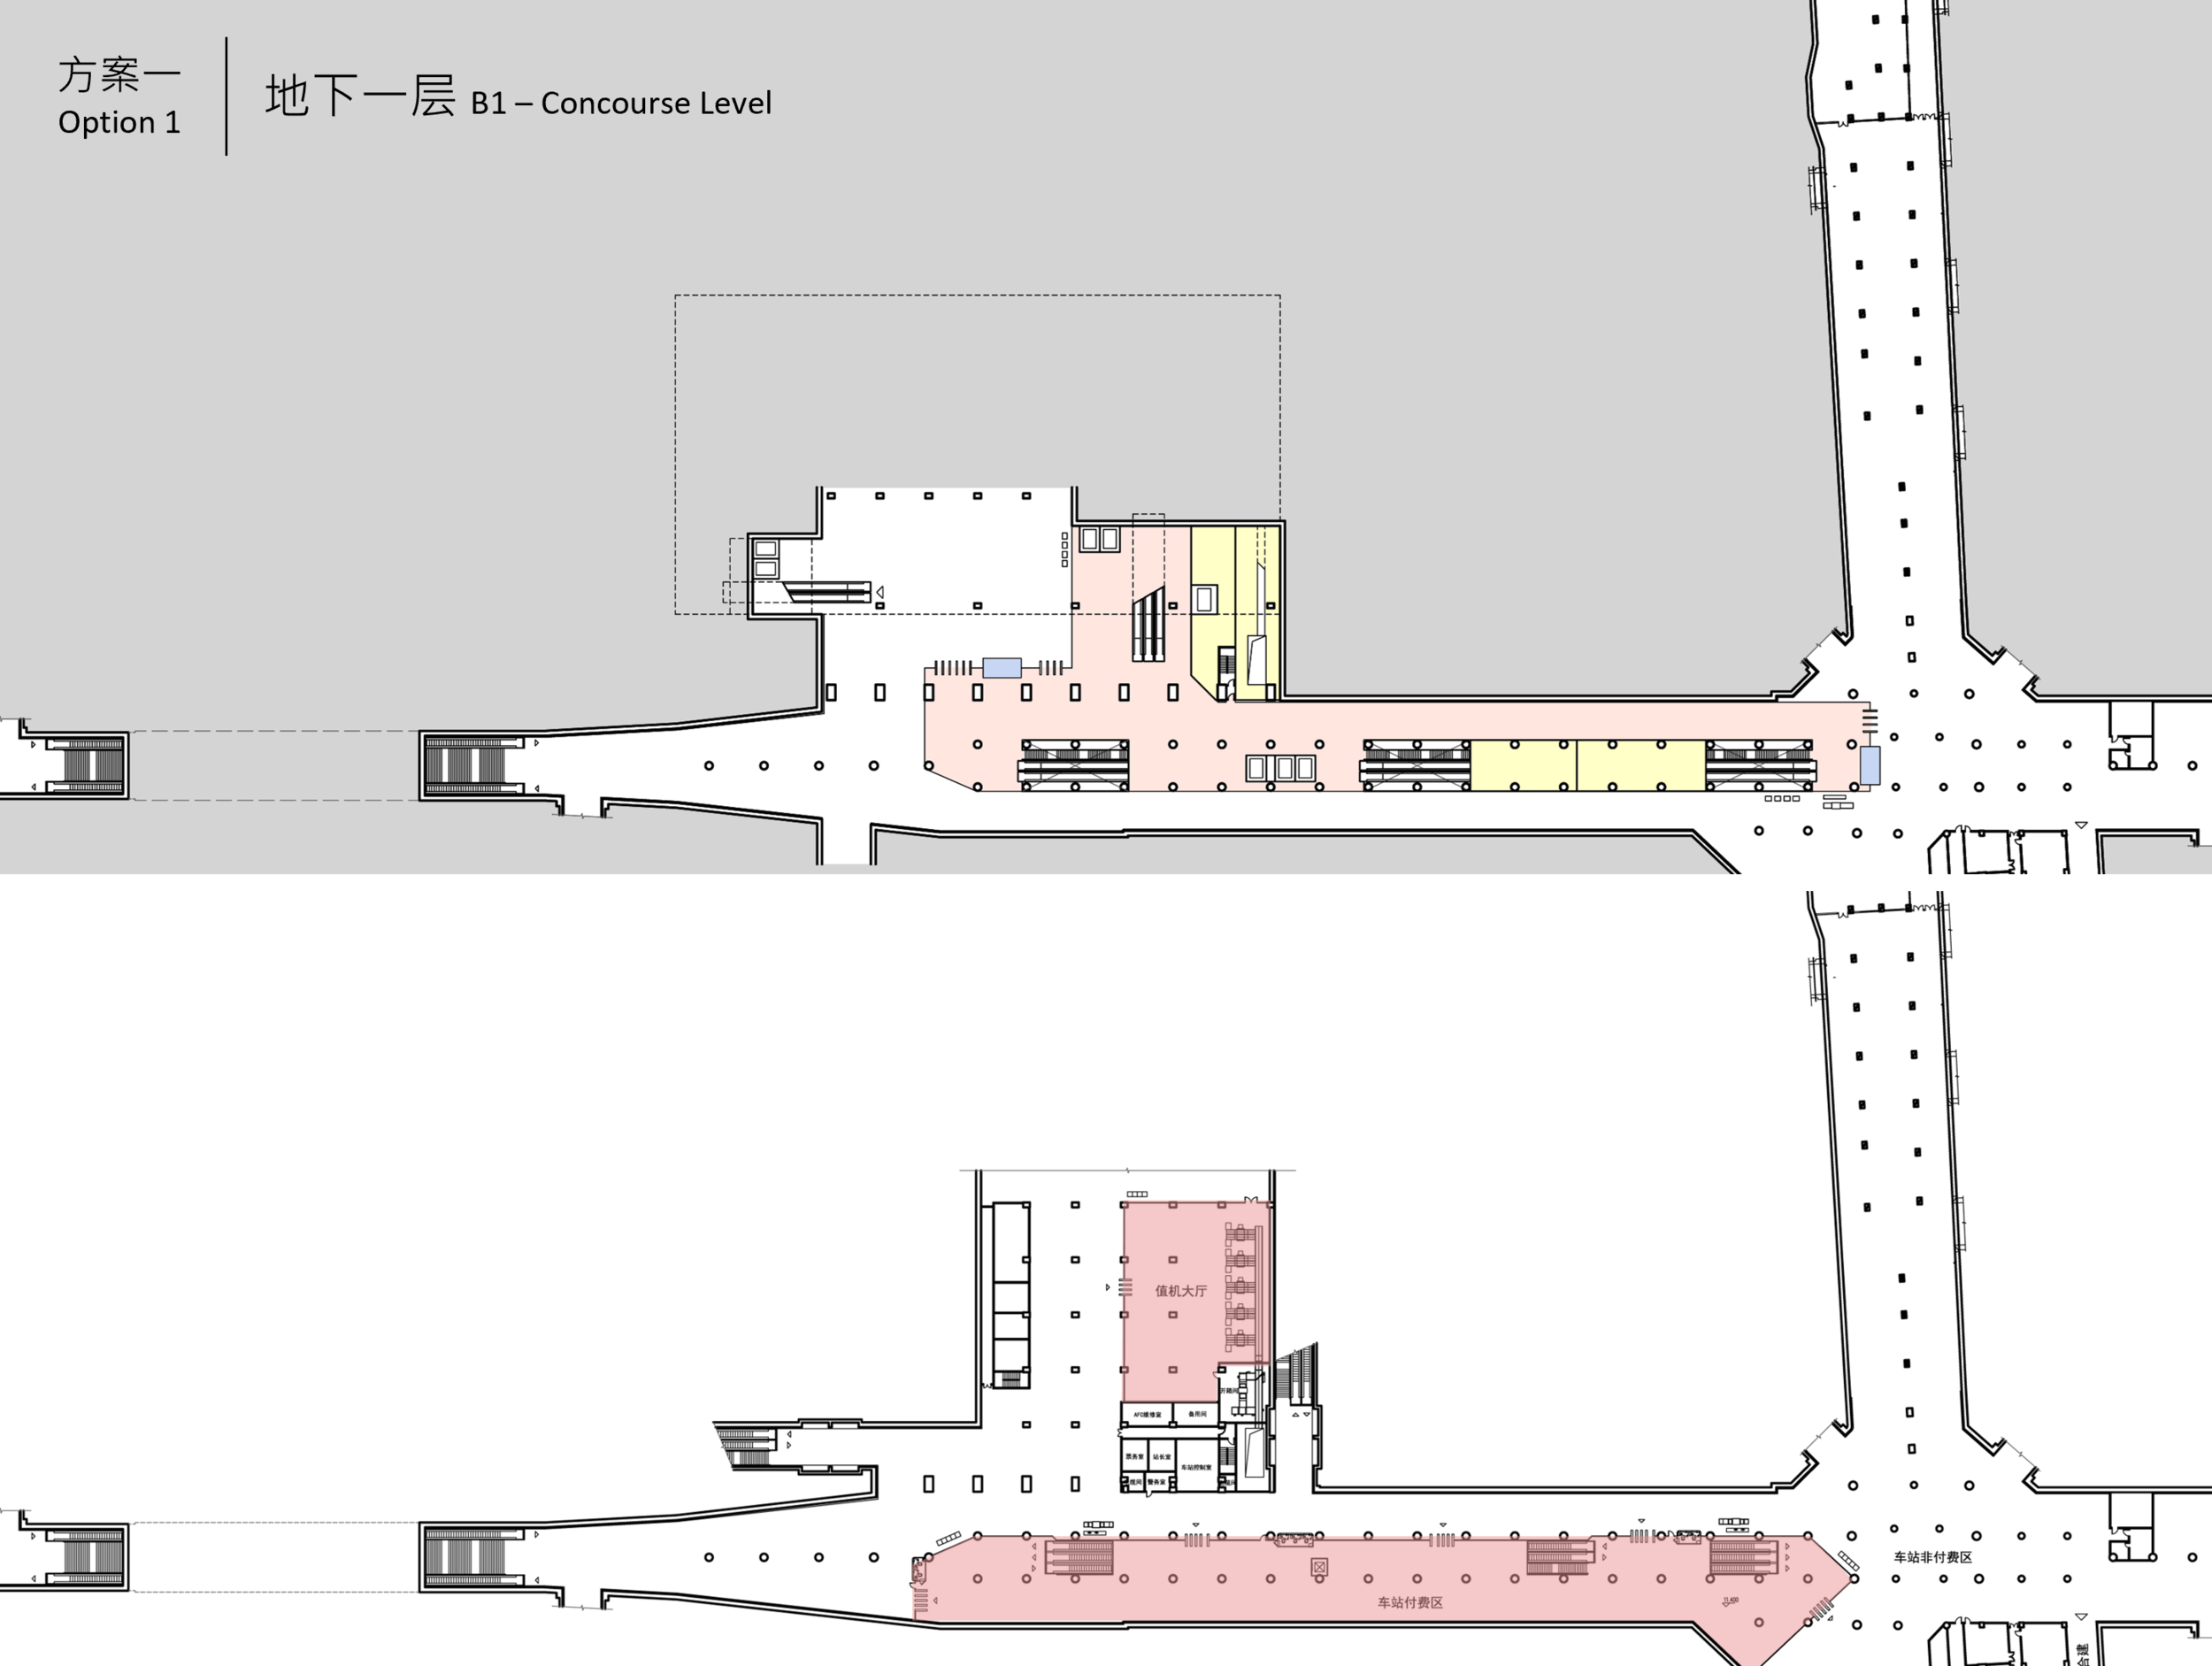 Floor plans of one of the alternatives for the Terminal